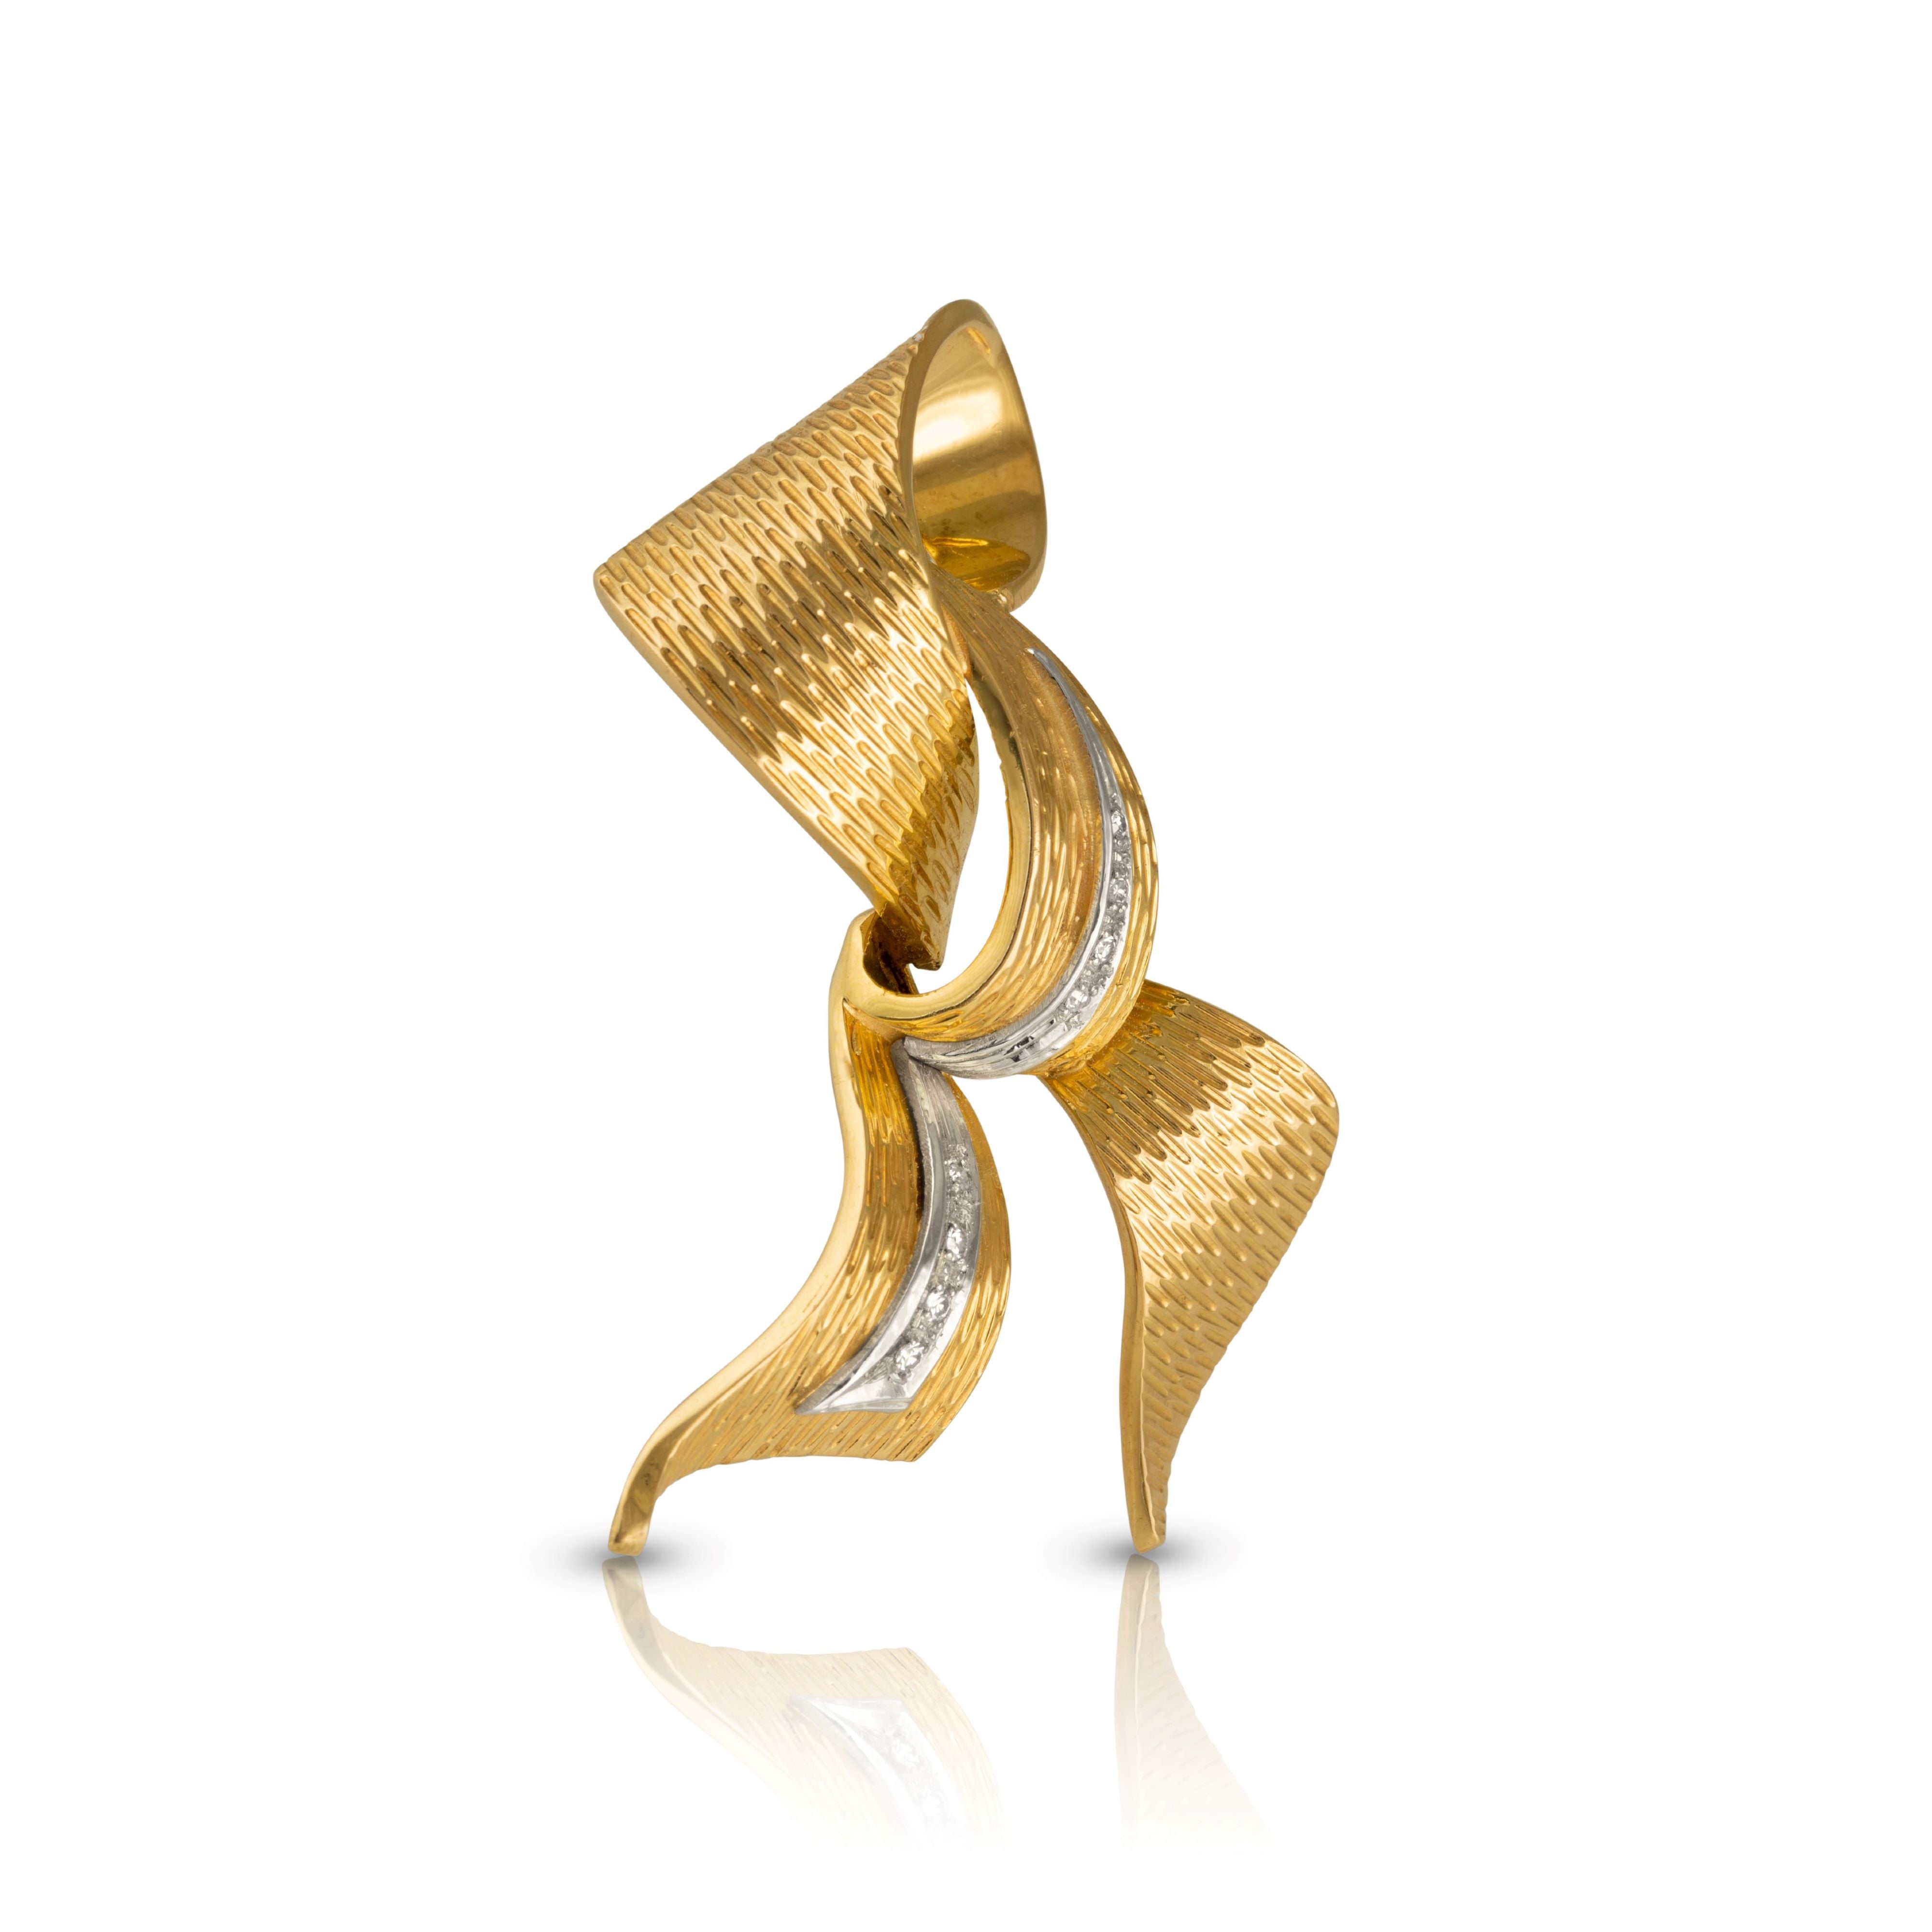 Side view of vintage gold brooch with diamonds.